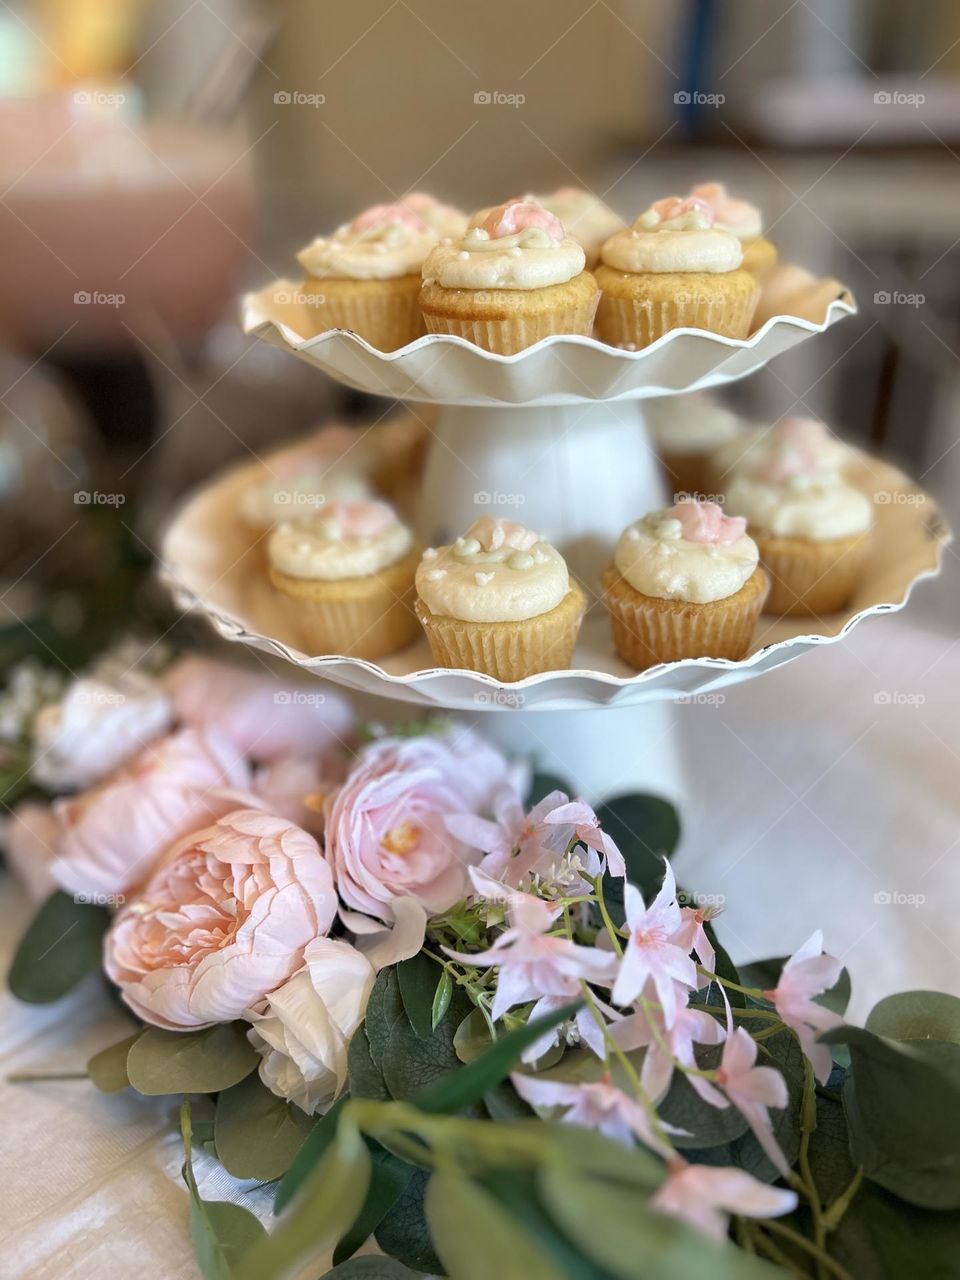 Cupcakes and Peonies for a Baby Shower 